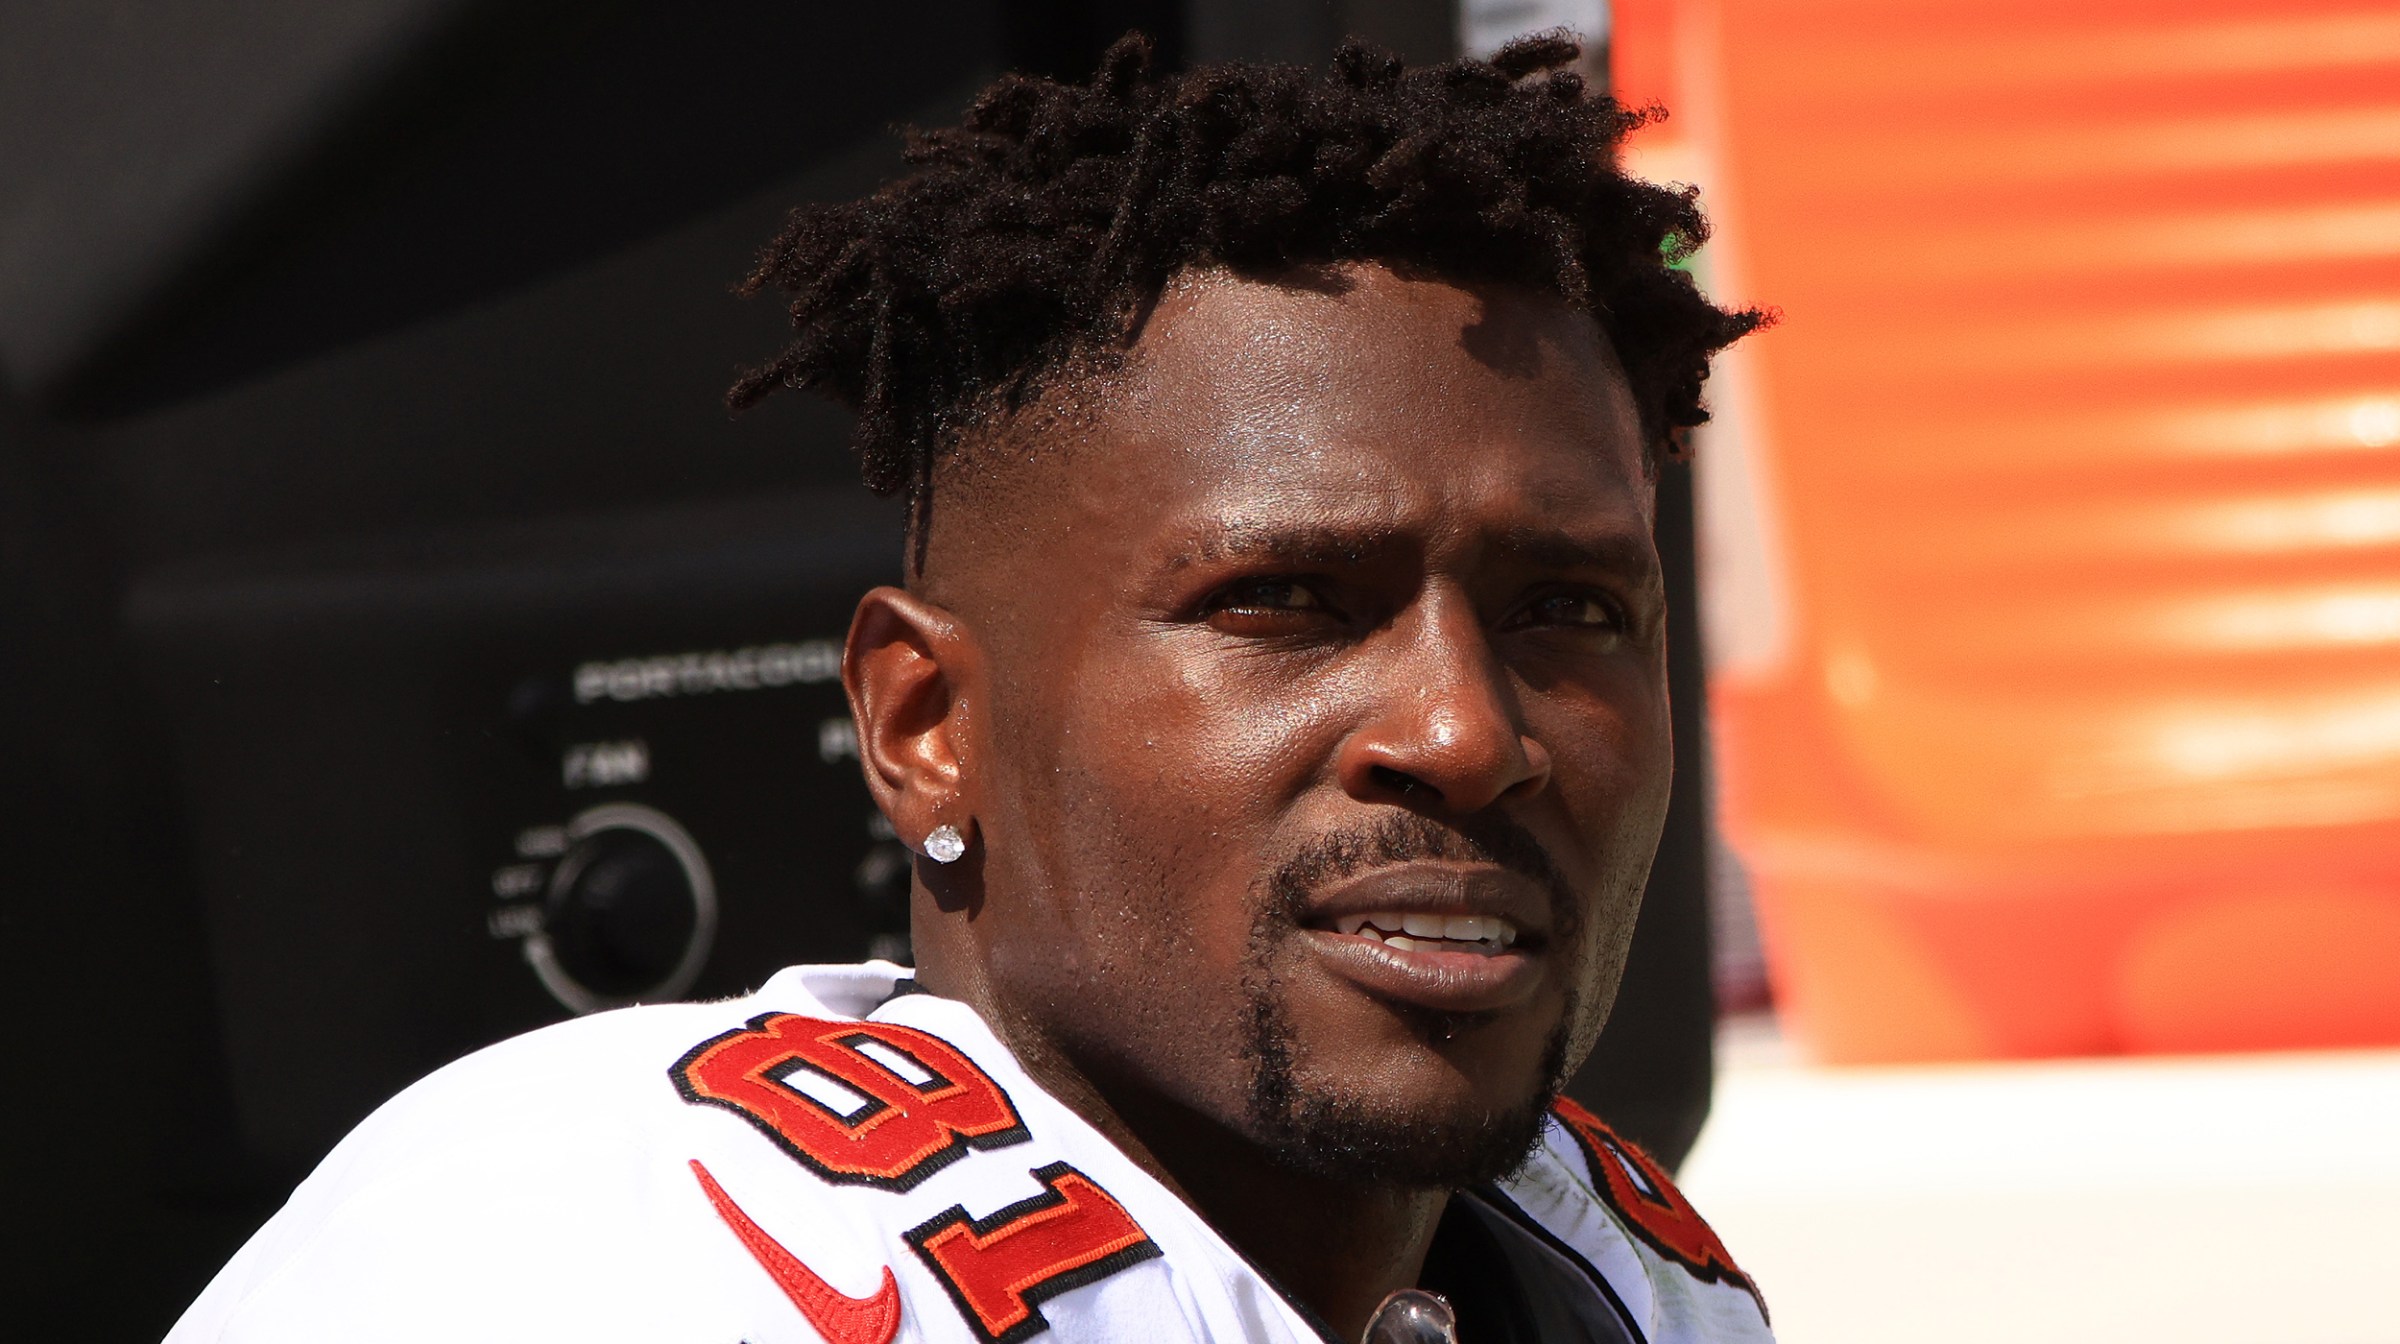 Antonio Brown #81 of the Tampa Bay Buccaneers looks on during the second quarter against the Miami Dolphins at Raymond James Stadium on October 10, 2021 in Tampa, Florida.